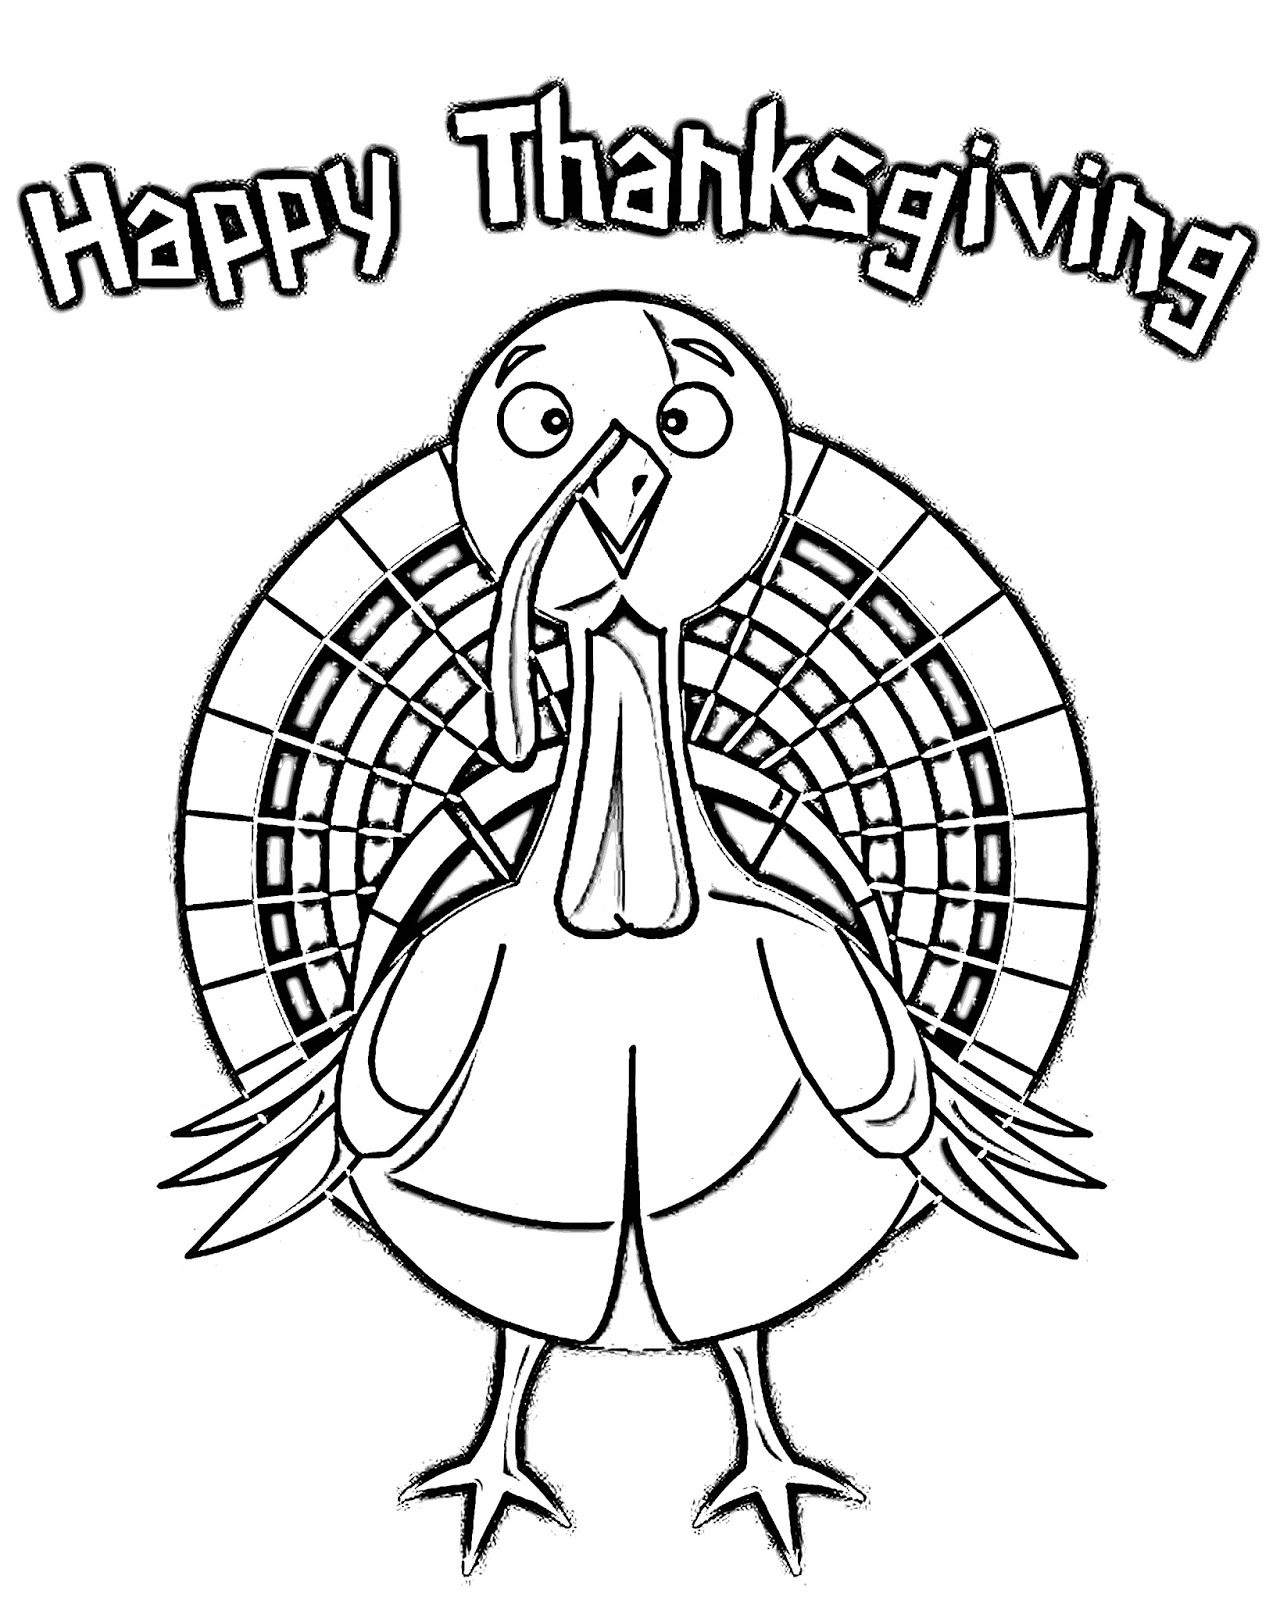 Download CJO Photo: Thanksgiving Coloring Page: Happy Thanksgiving Turkey